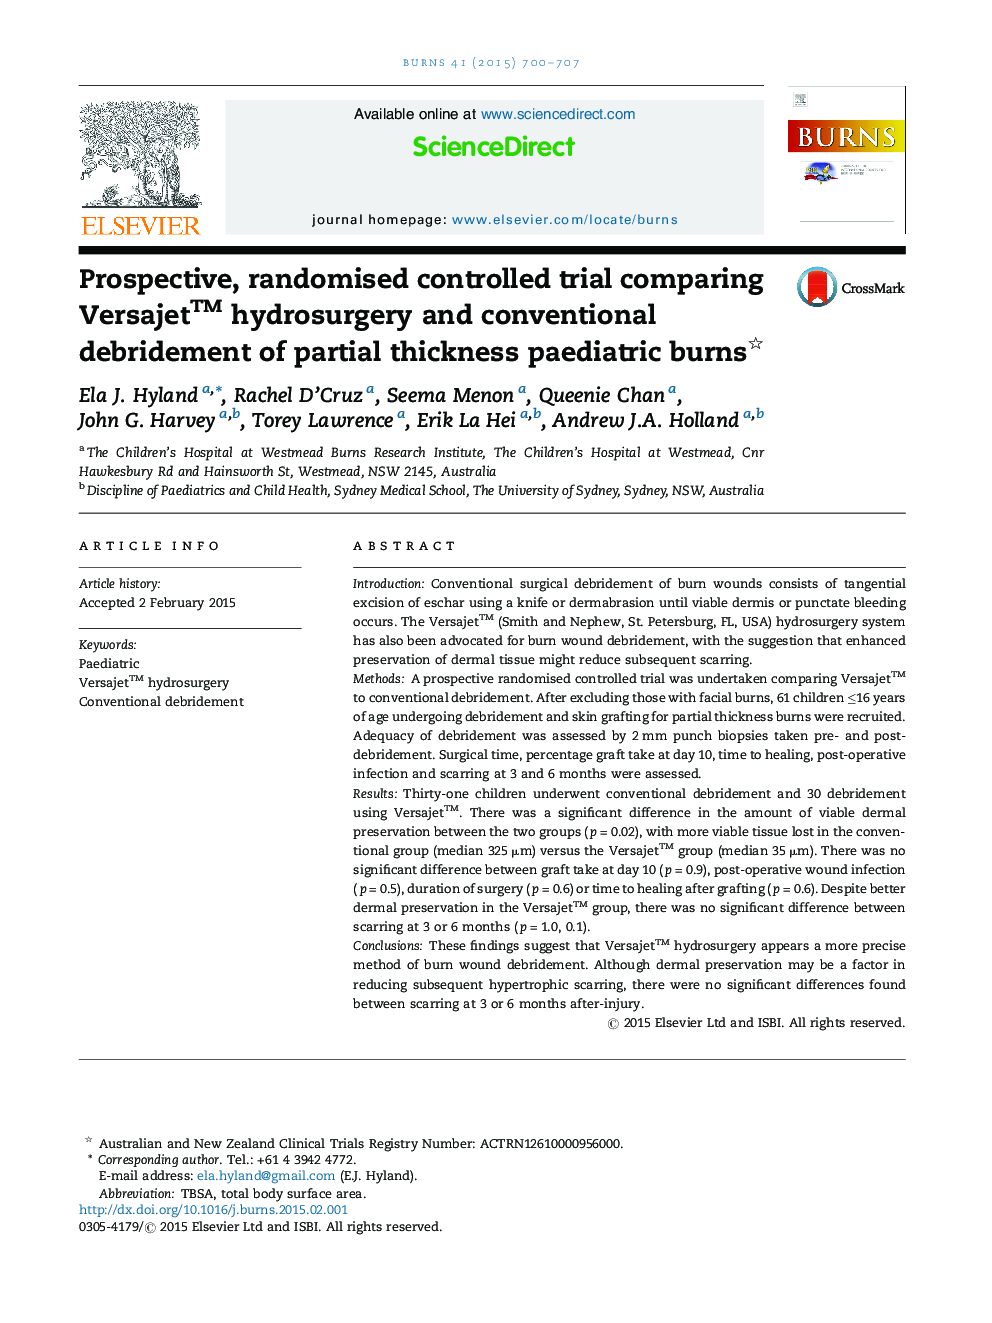 Prospective, randomised controlled trial comparing Versajet™ hydrosurgery and conventional debridement of partial thickness paediatric burns 